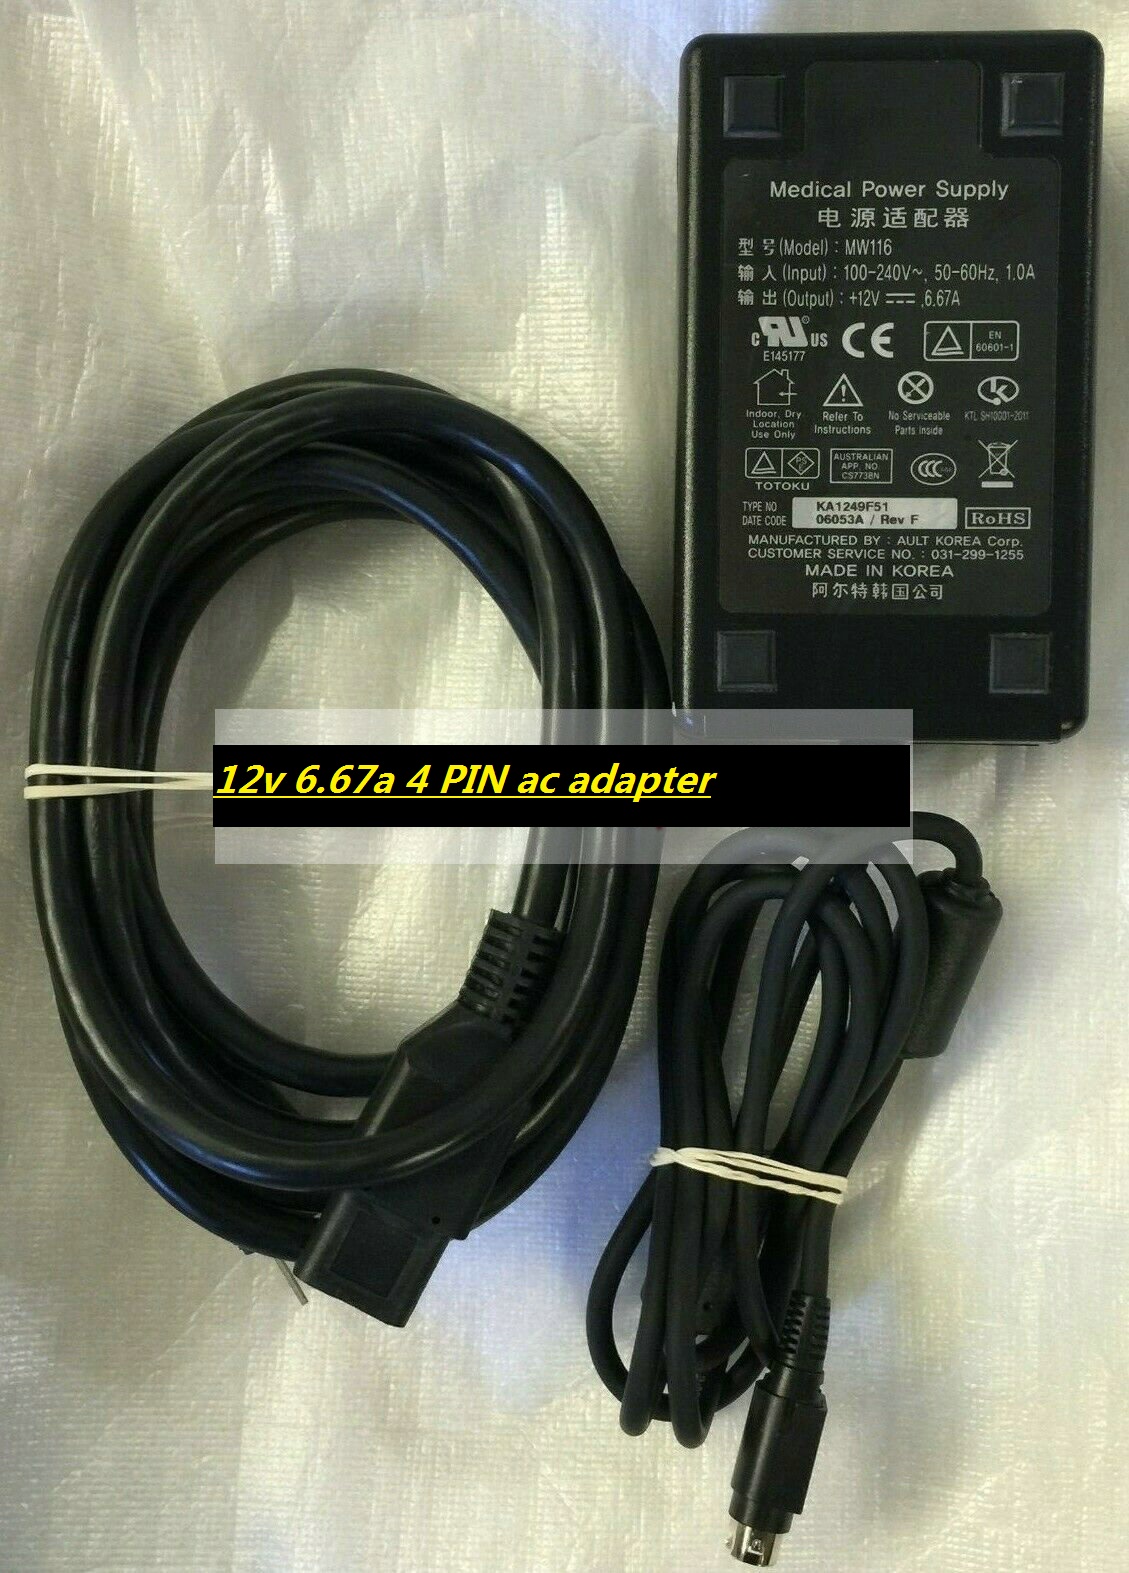 *Brand NEW* 12v 6.67a 4 PIN ac adapter Totoku/Ault MW116 KA1249F51 Medical Power Supply